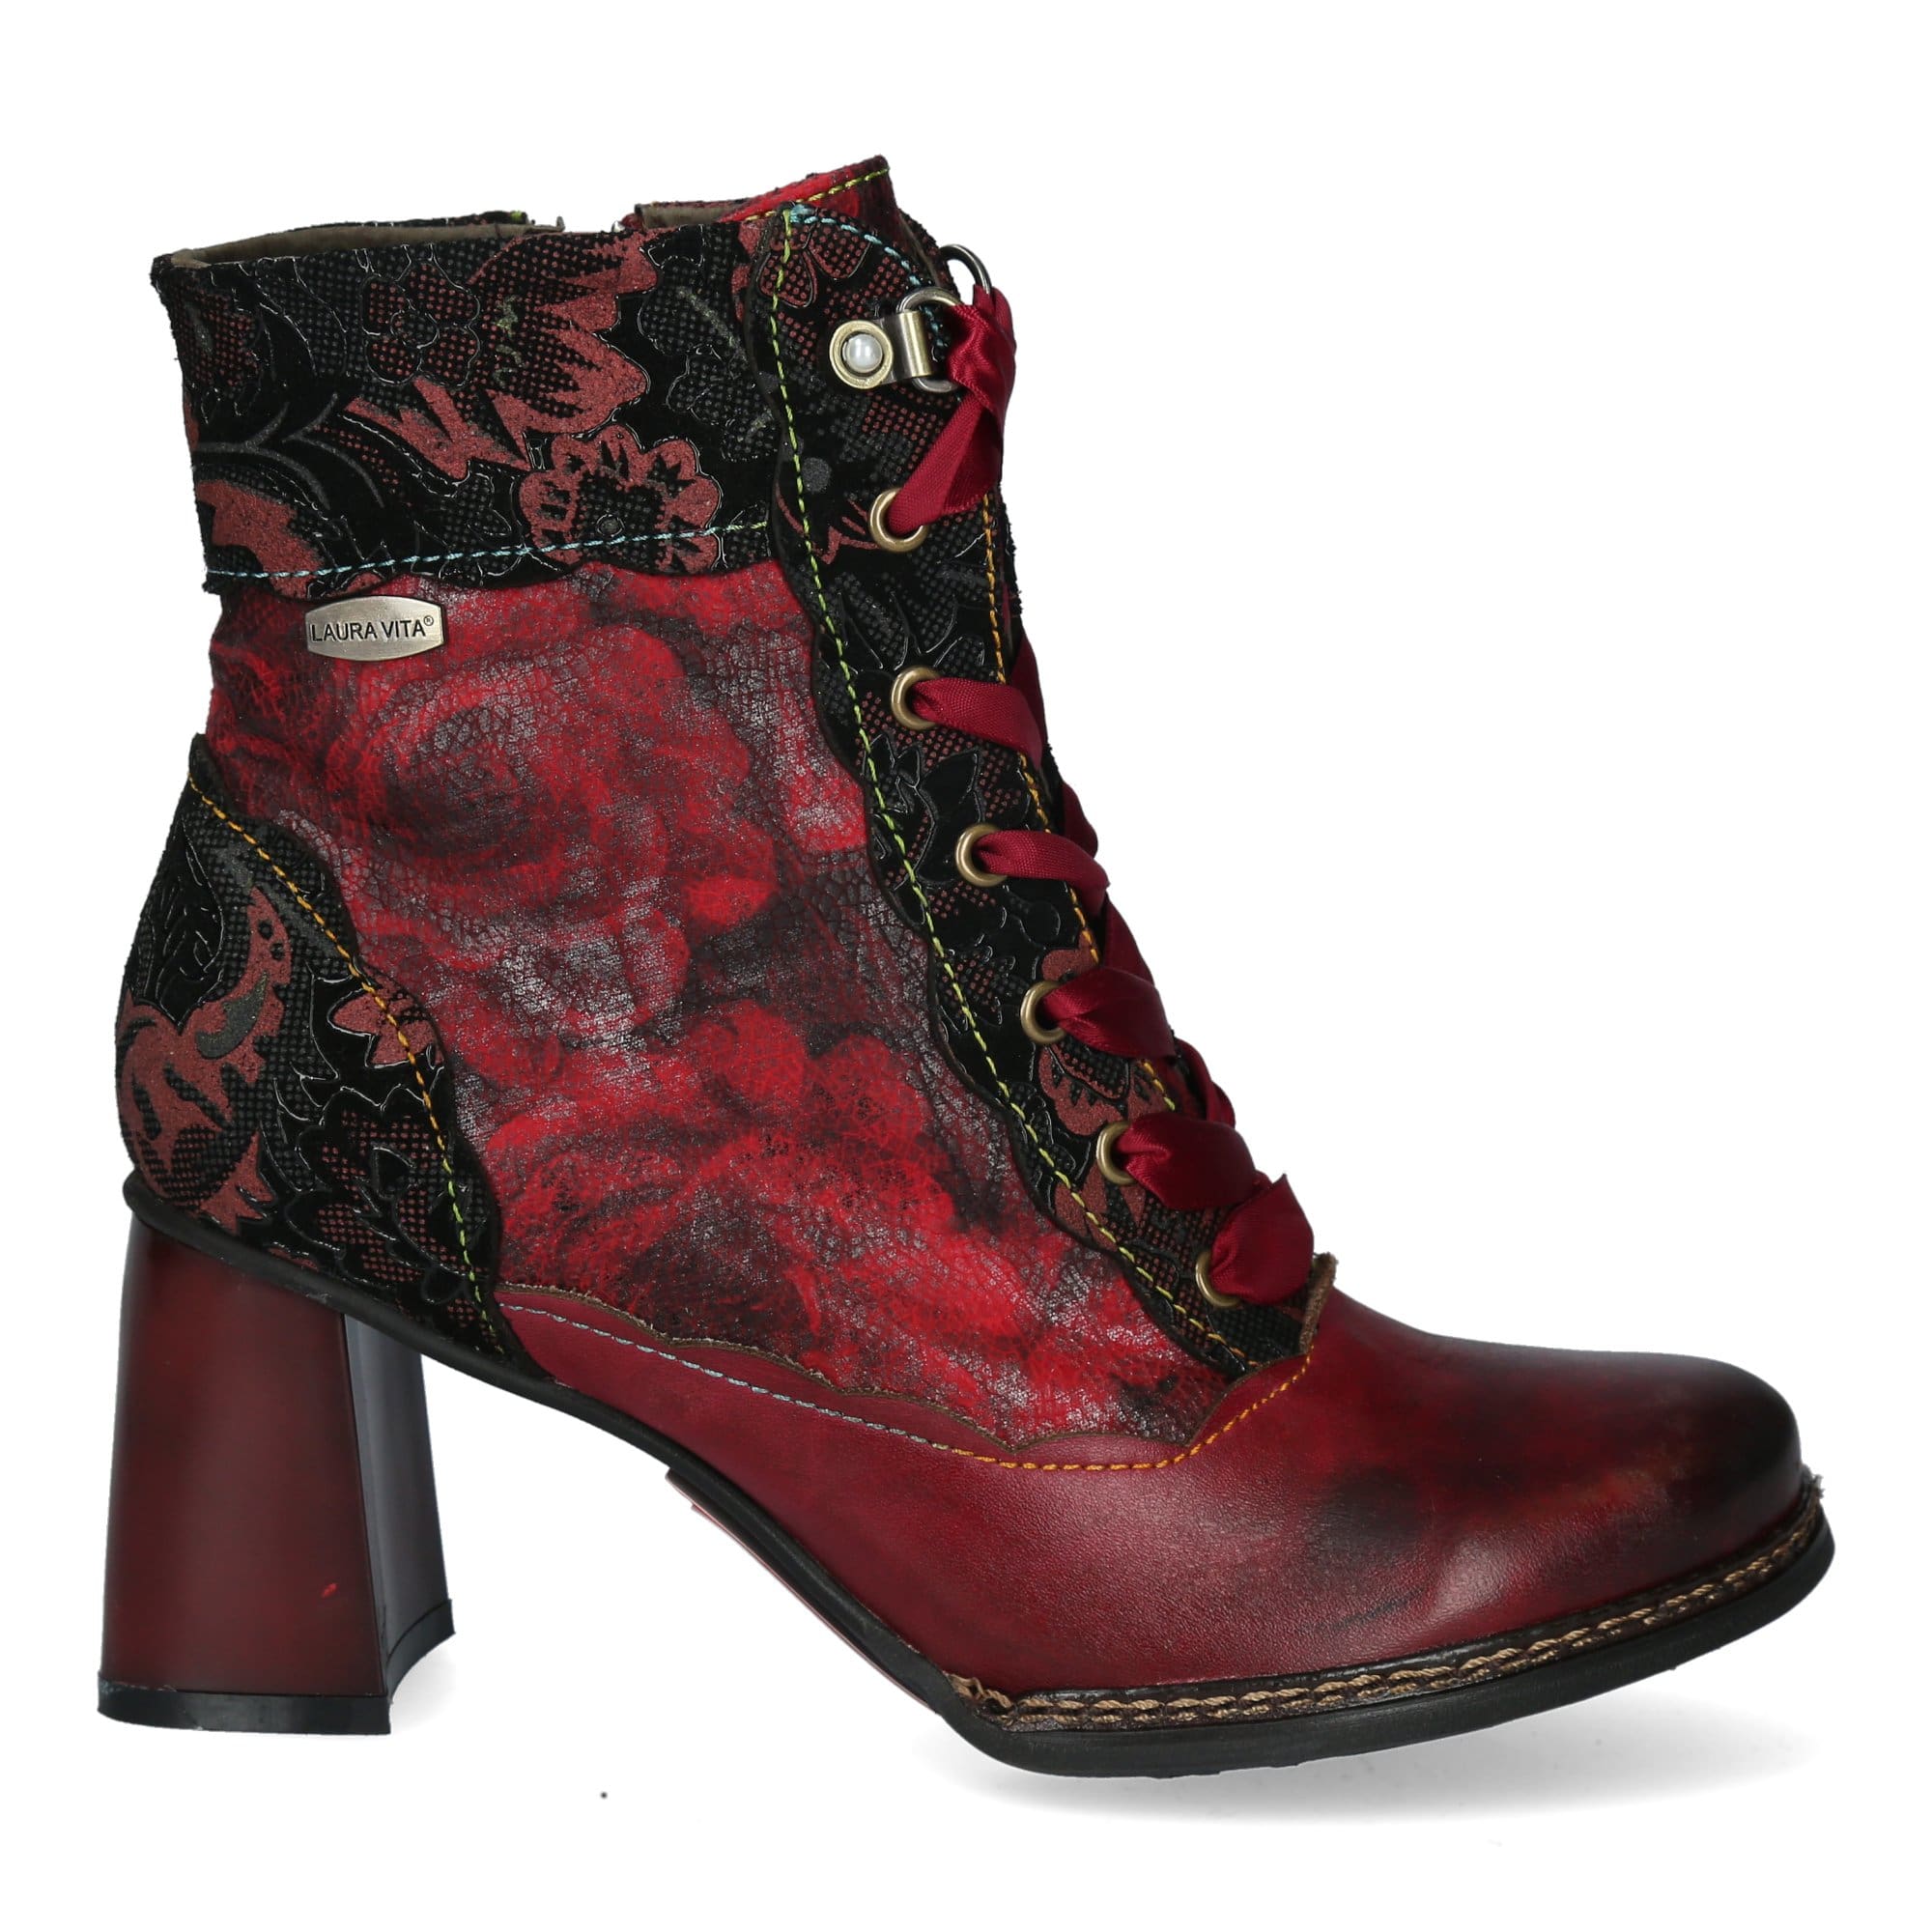 IDCANO 06 - 35 / Red - Boots